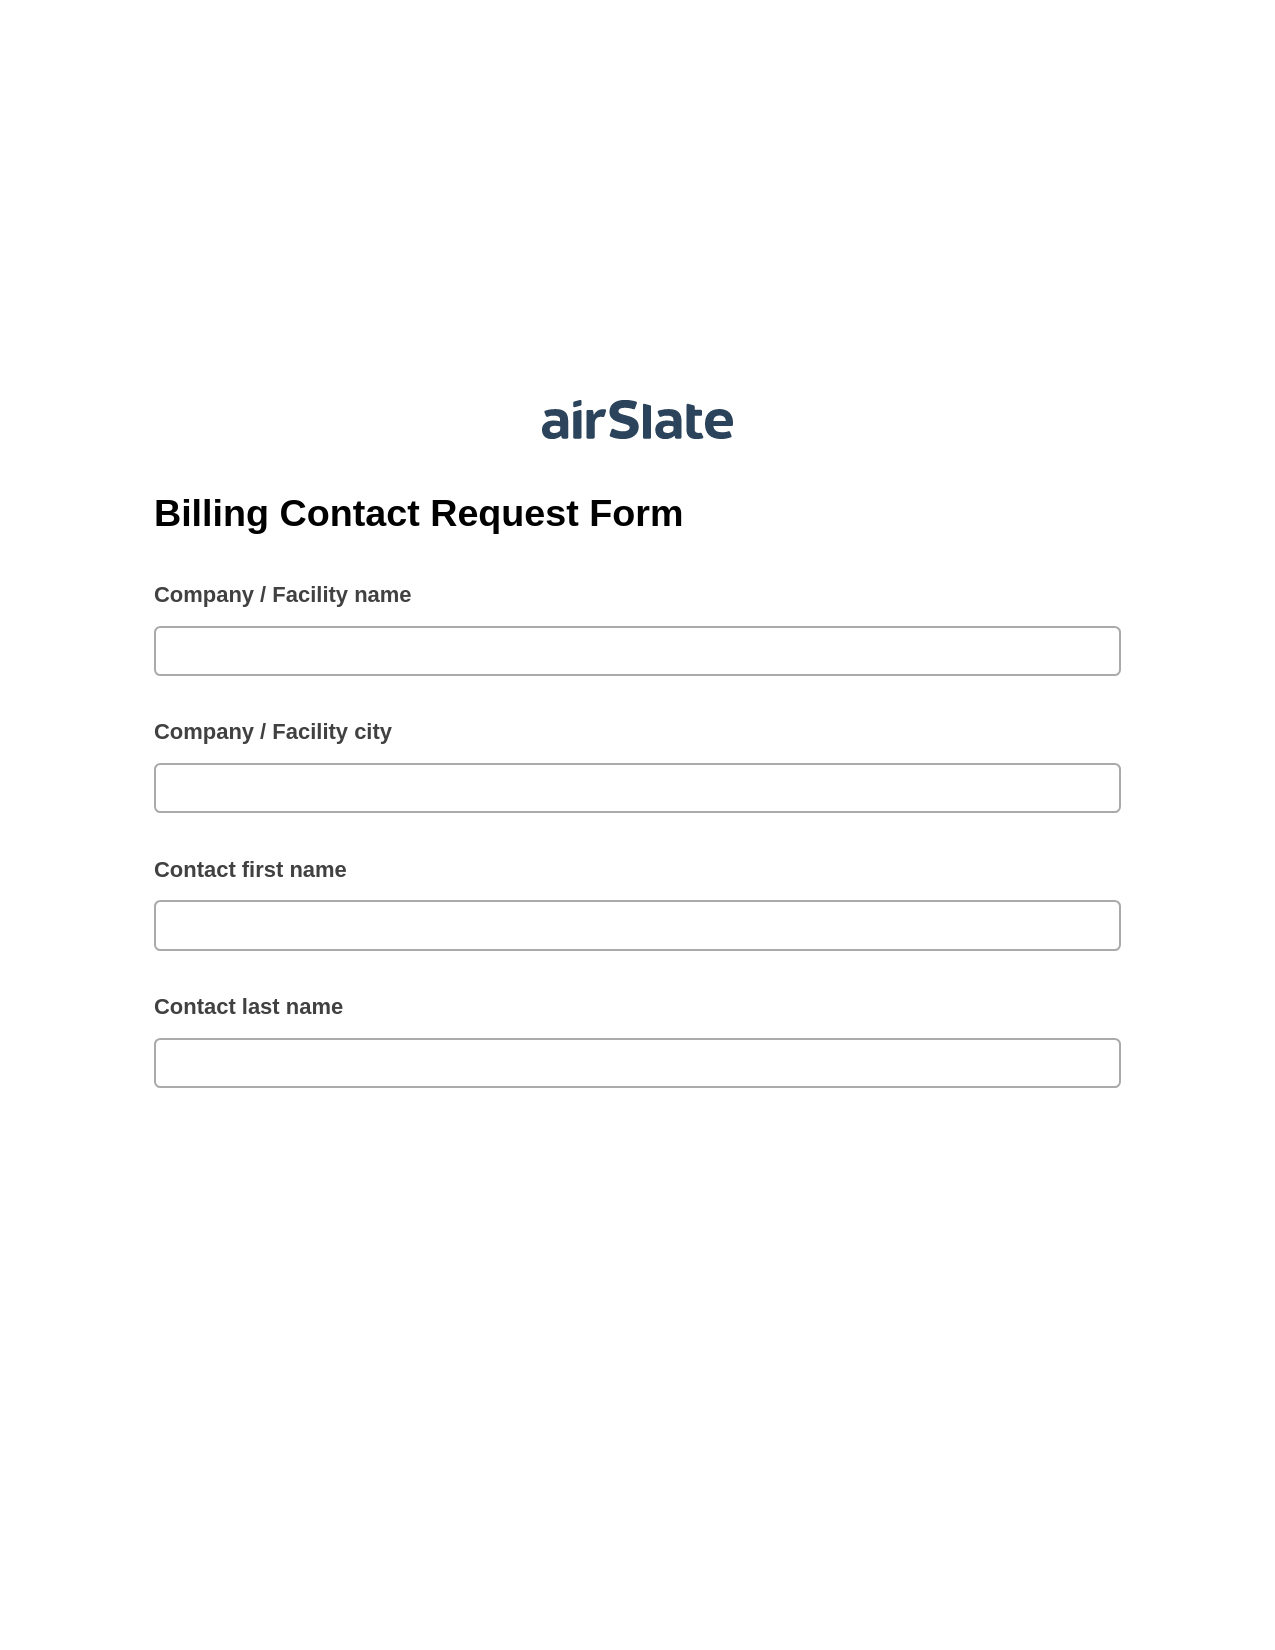 Multirole Billing Contact Request Form Pre-fill from Excel Spreadsheet Bot, Send Mailchimp Campaign Bot, Post-finish Document Bot